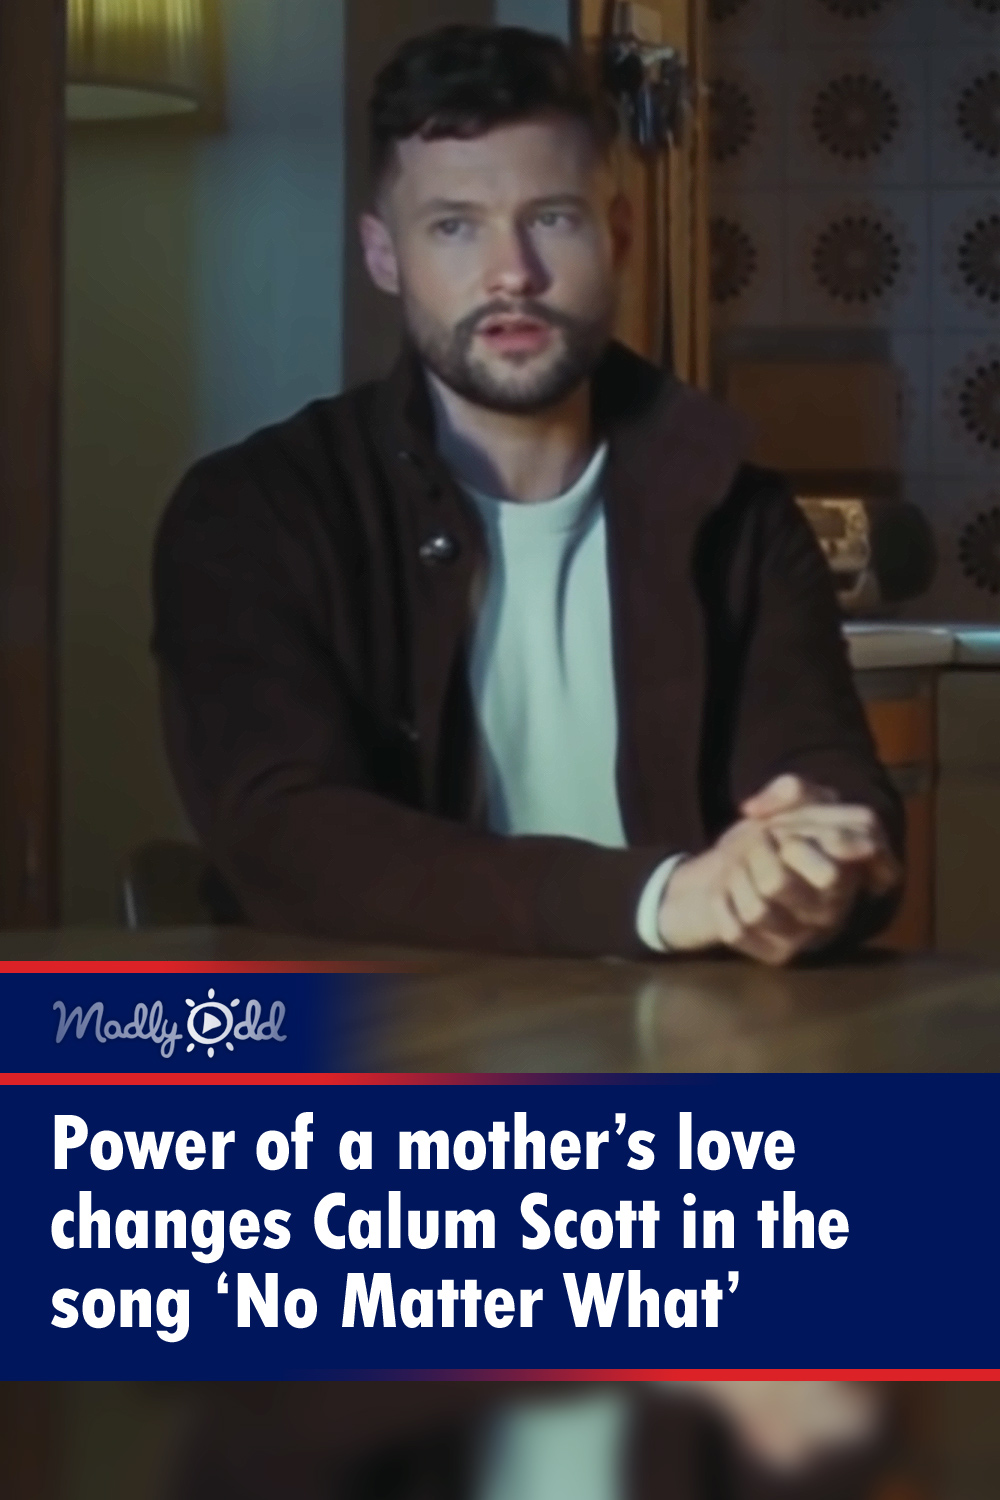 Power of a mother’s love changes Calum Scott in the song ‘No Matter What’